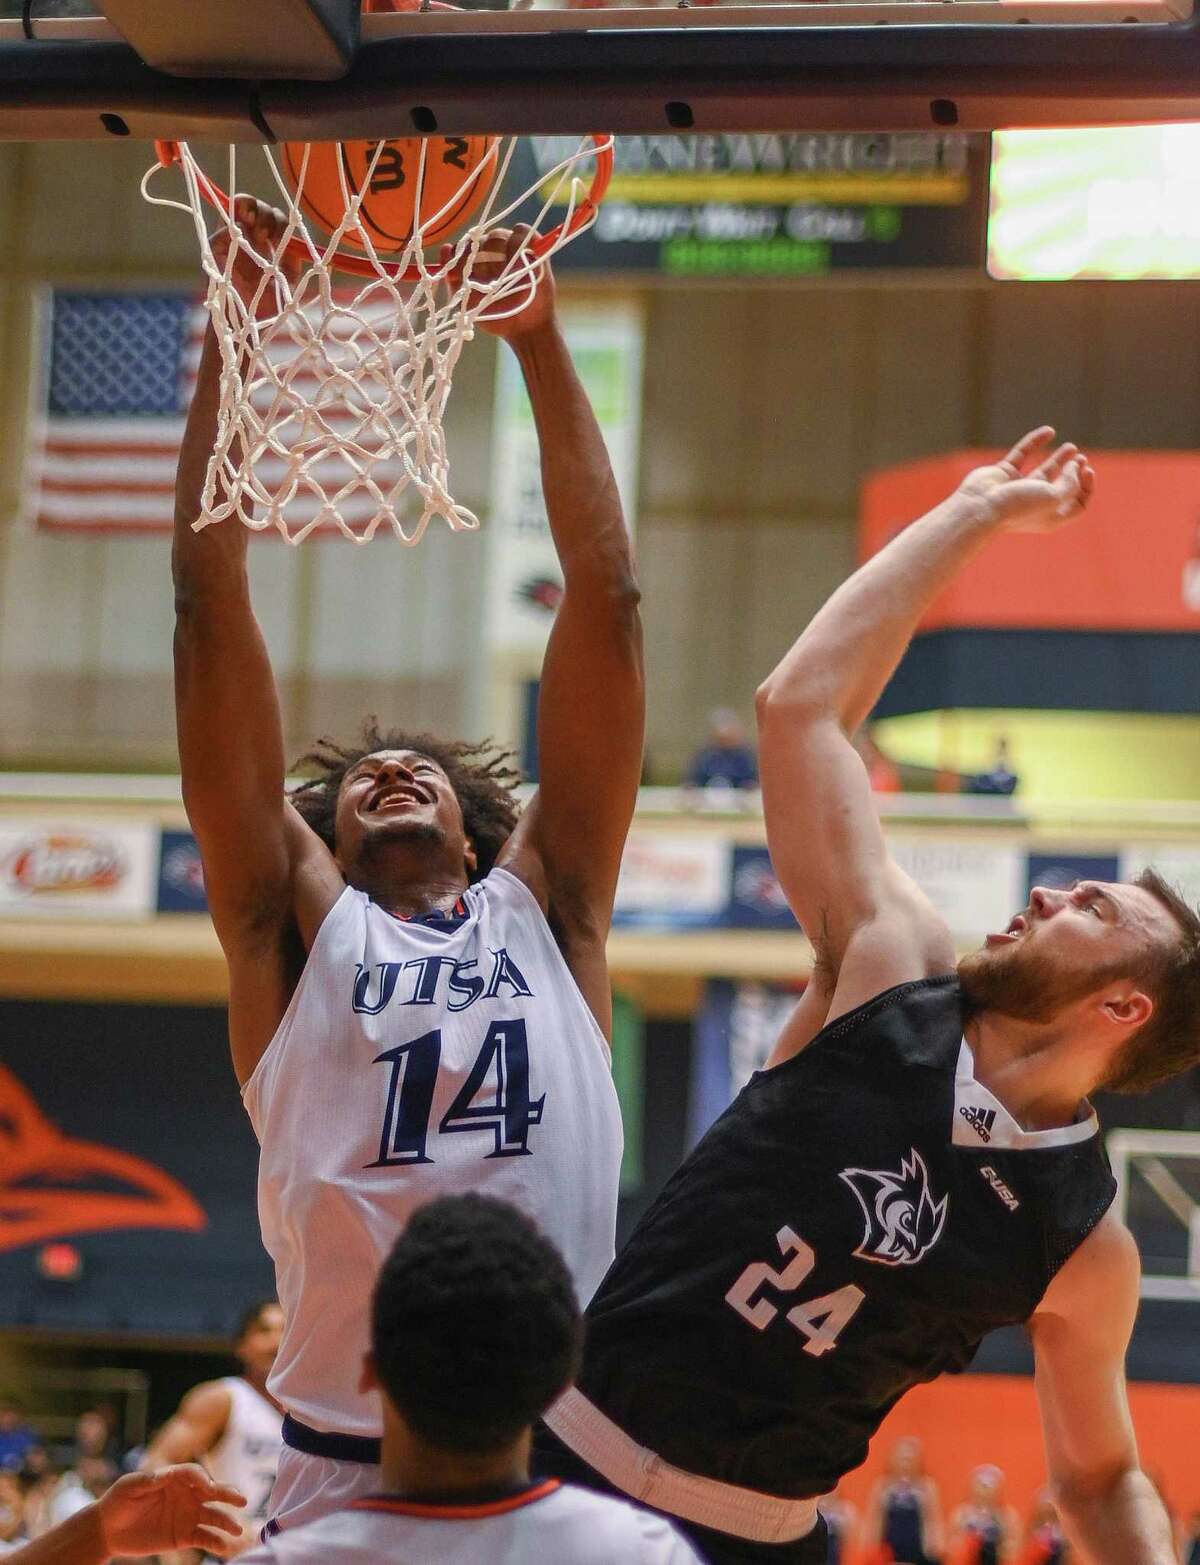 UTSA’s Massal Diouf received a technical foul for hanging on the rim on this attempted dunk against Rice’s Jake Lieppert during Monday night’s game at the Convocation Center.